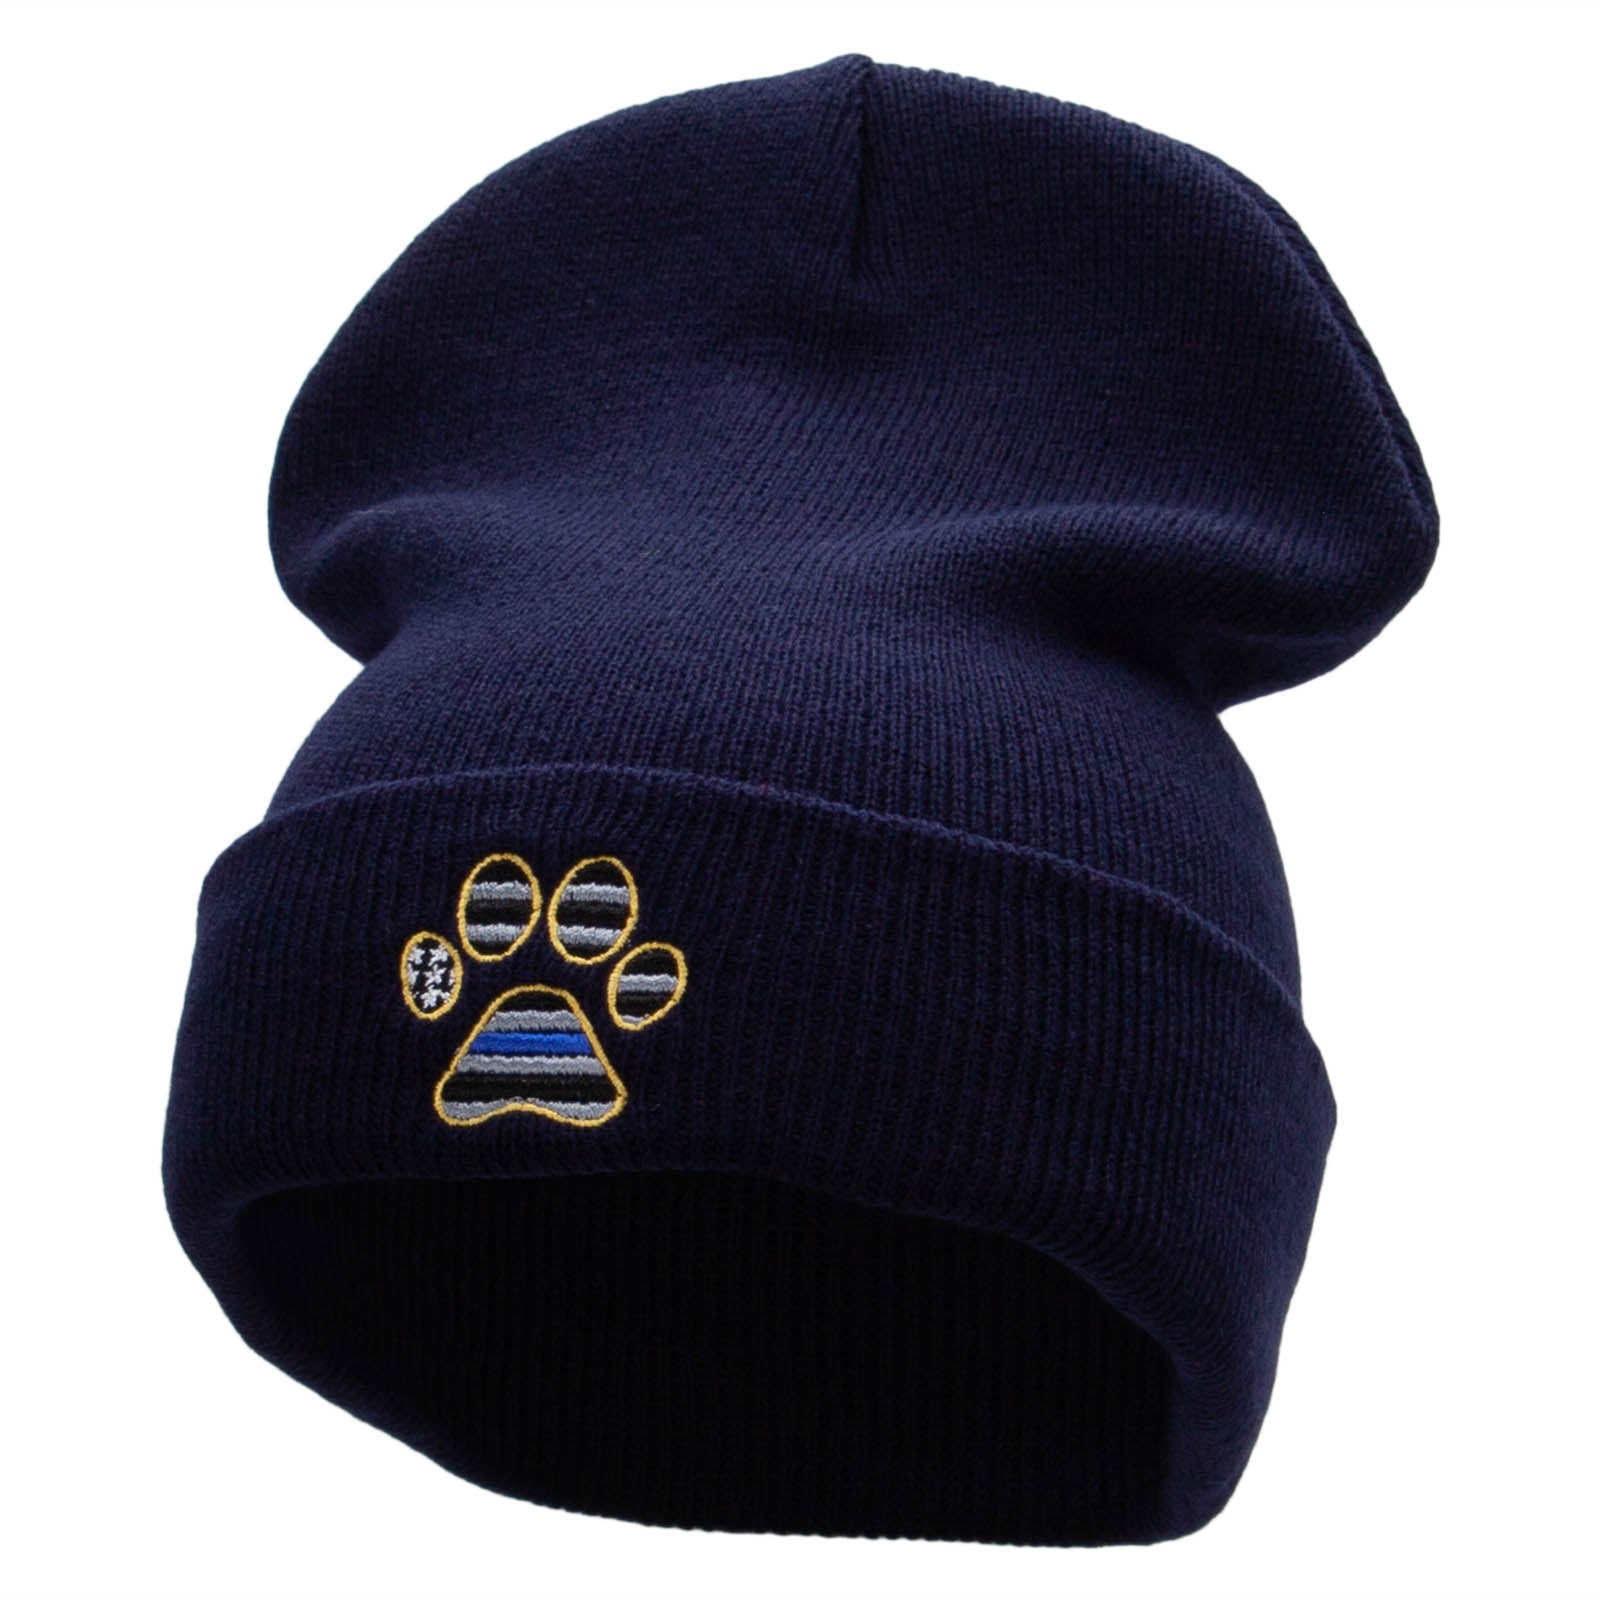 Paw Police Embroidered 12 Inch Solid Long Beanie Made in USA - Navy OSFM